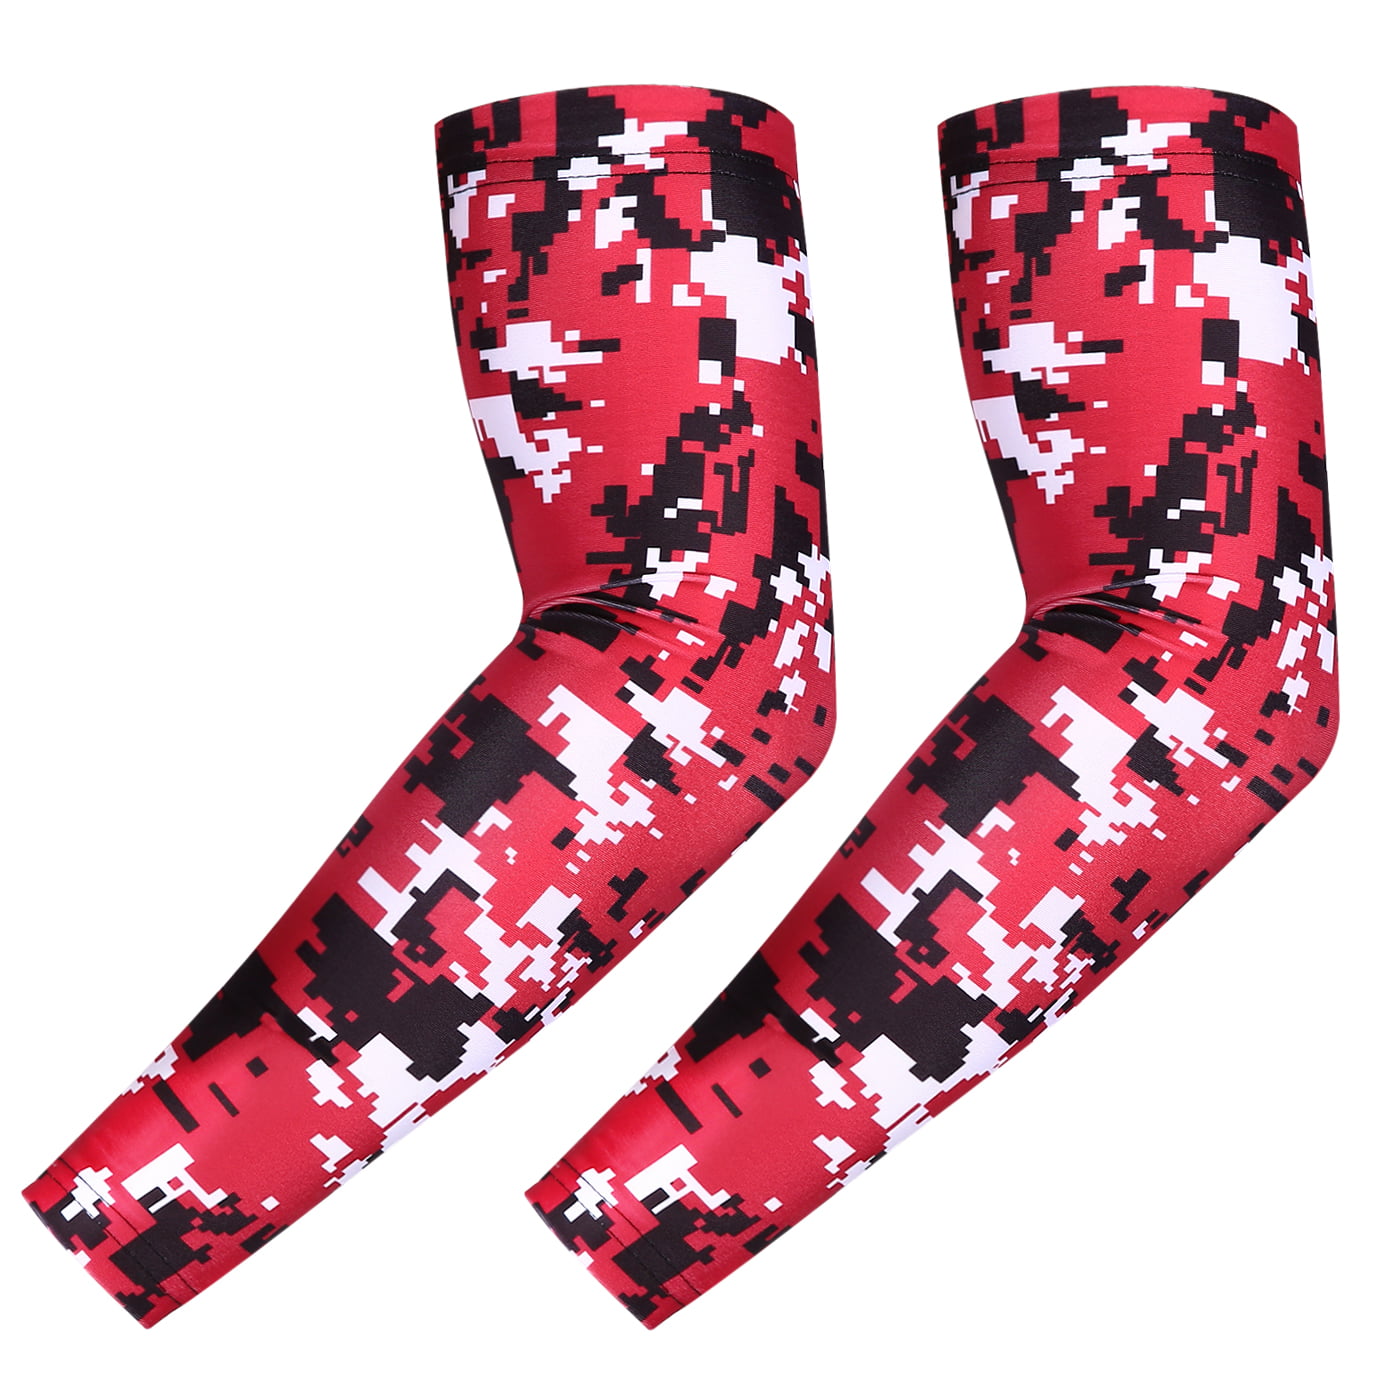 CompressionZ Youth Compression Arm Sleeves - Sports Sleeve For Kids Boys  Girls